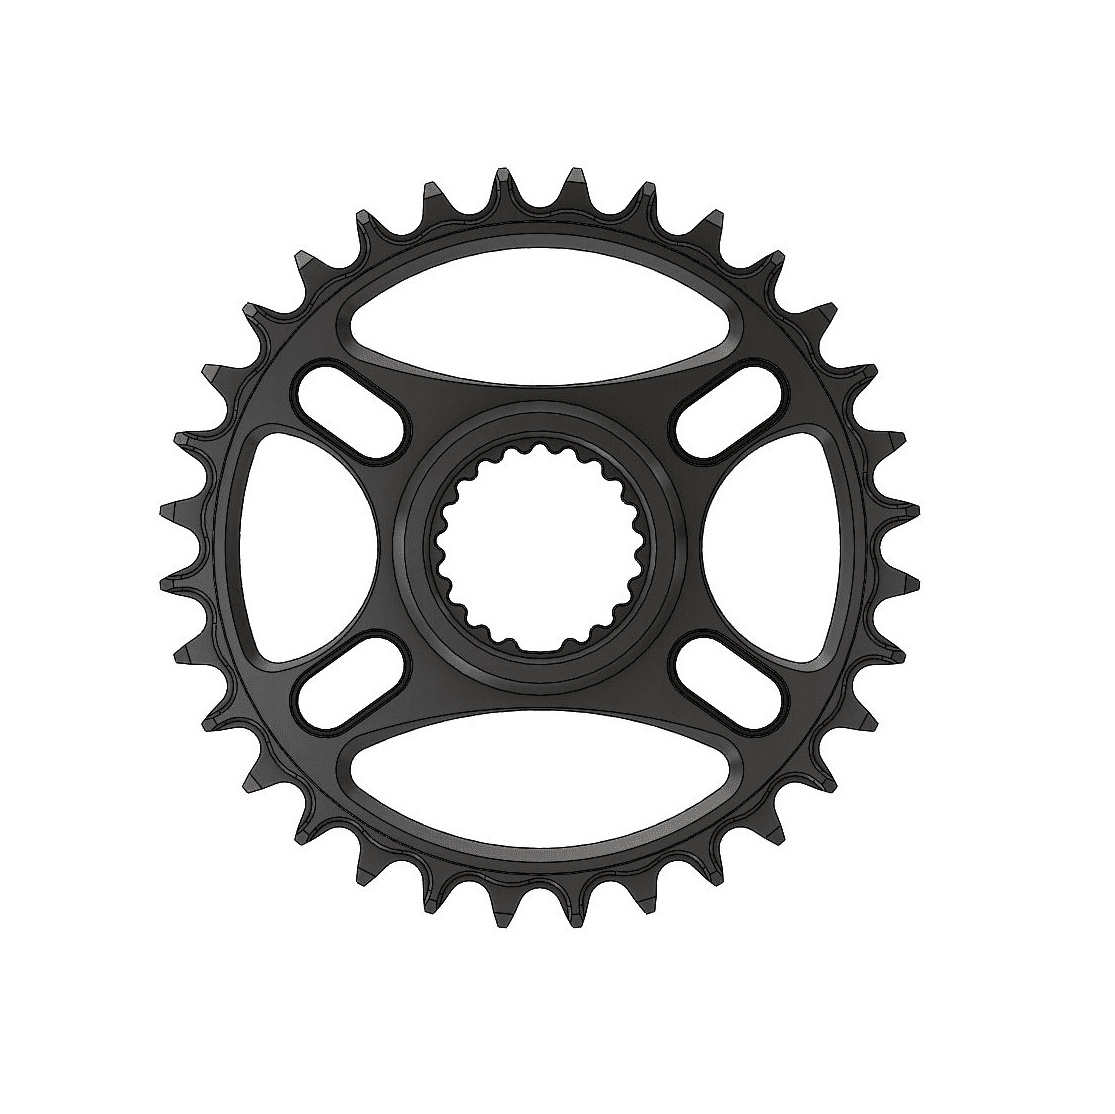 Pilo 32T Chainring For Shimano Cranks - Replacement Chainrings